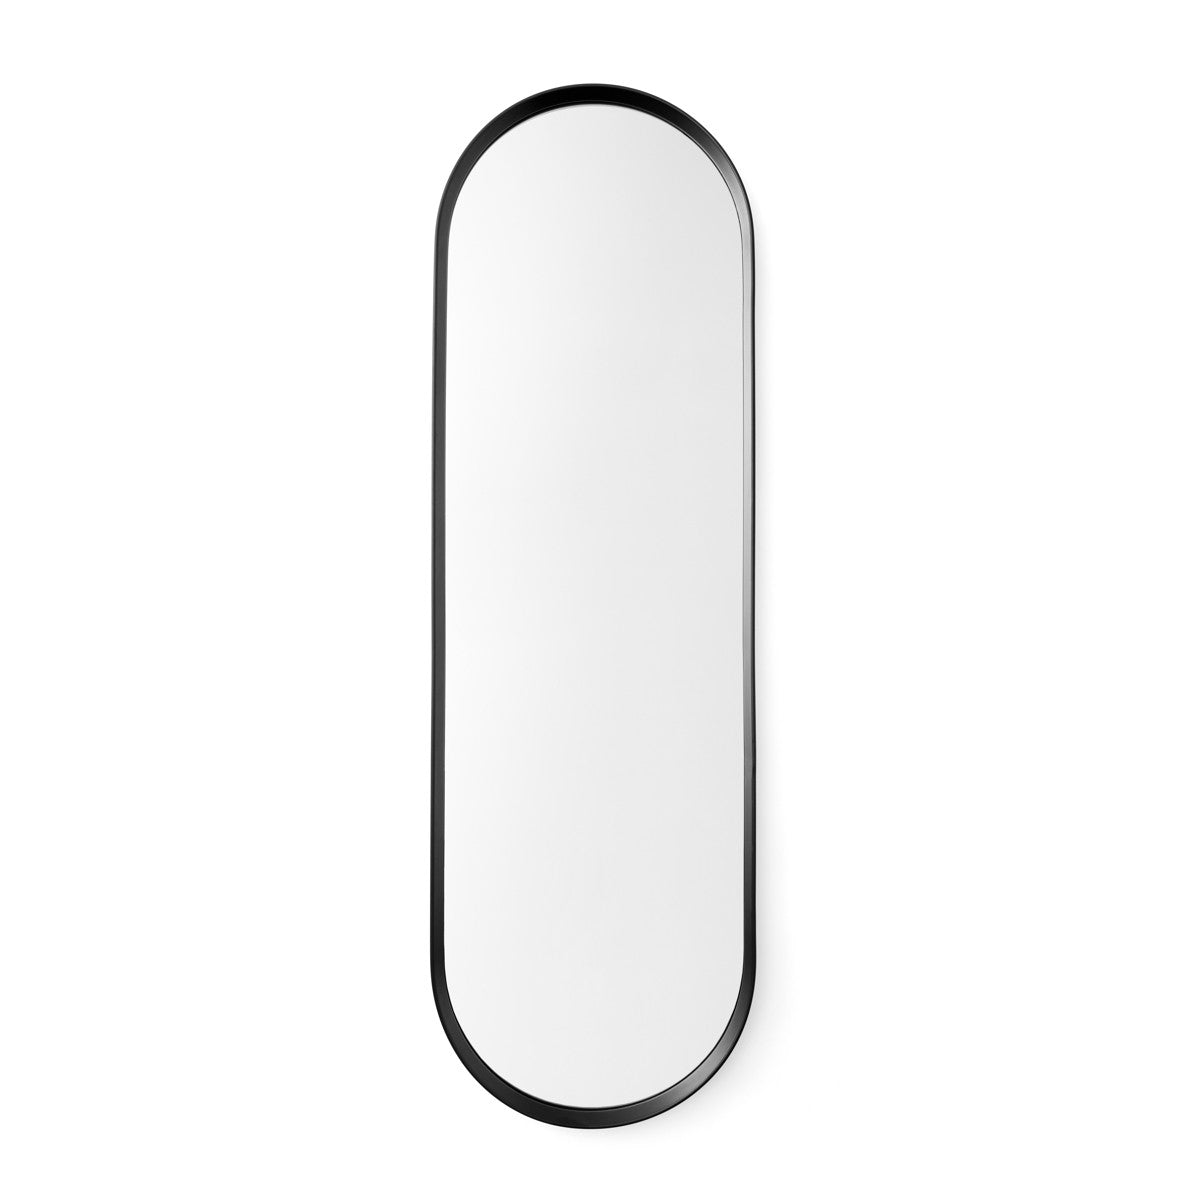 Norm Oval Wall Mirror by Norm Architects